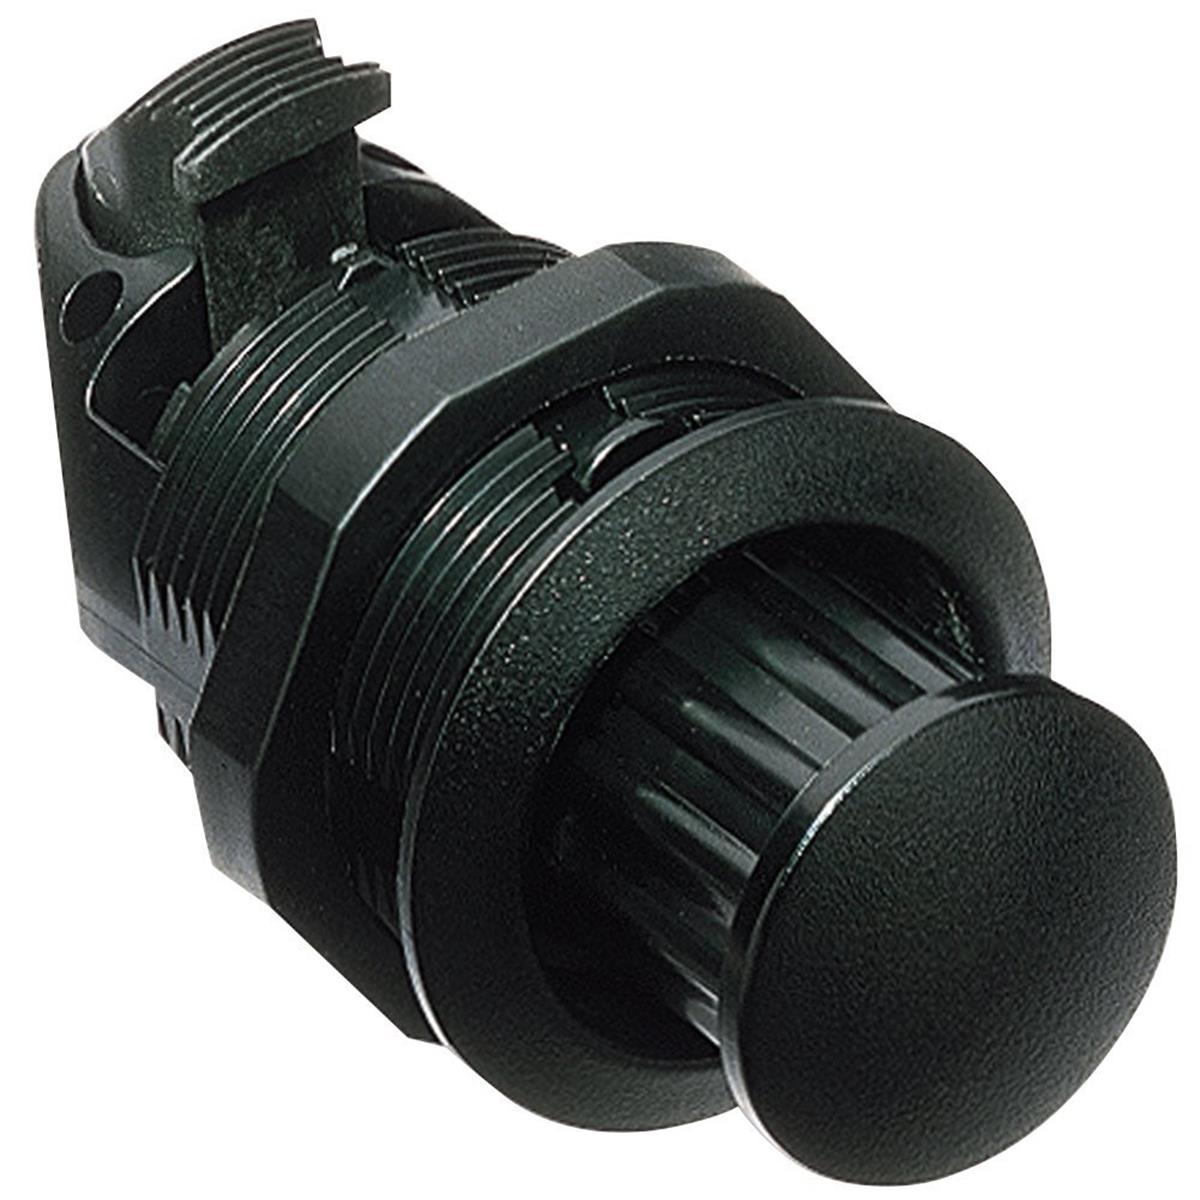 M1-2a-13-5 Plastic Pop Out Knob Latch With Fixed Grip Threaded Body - Black